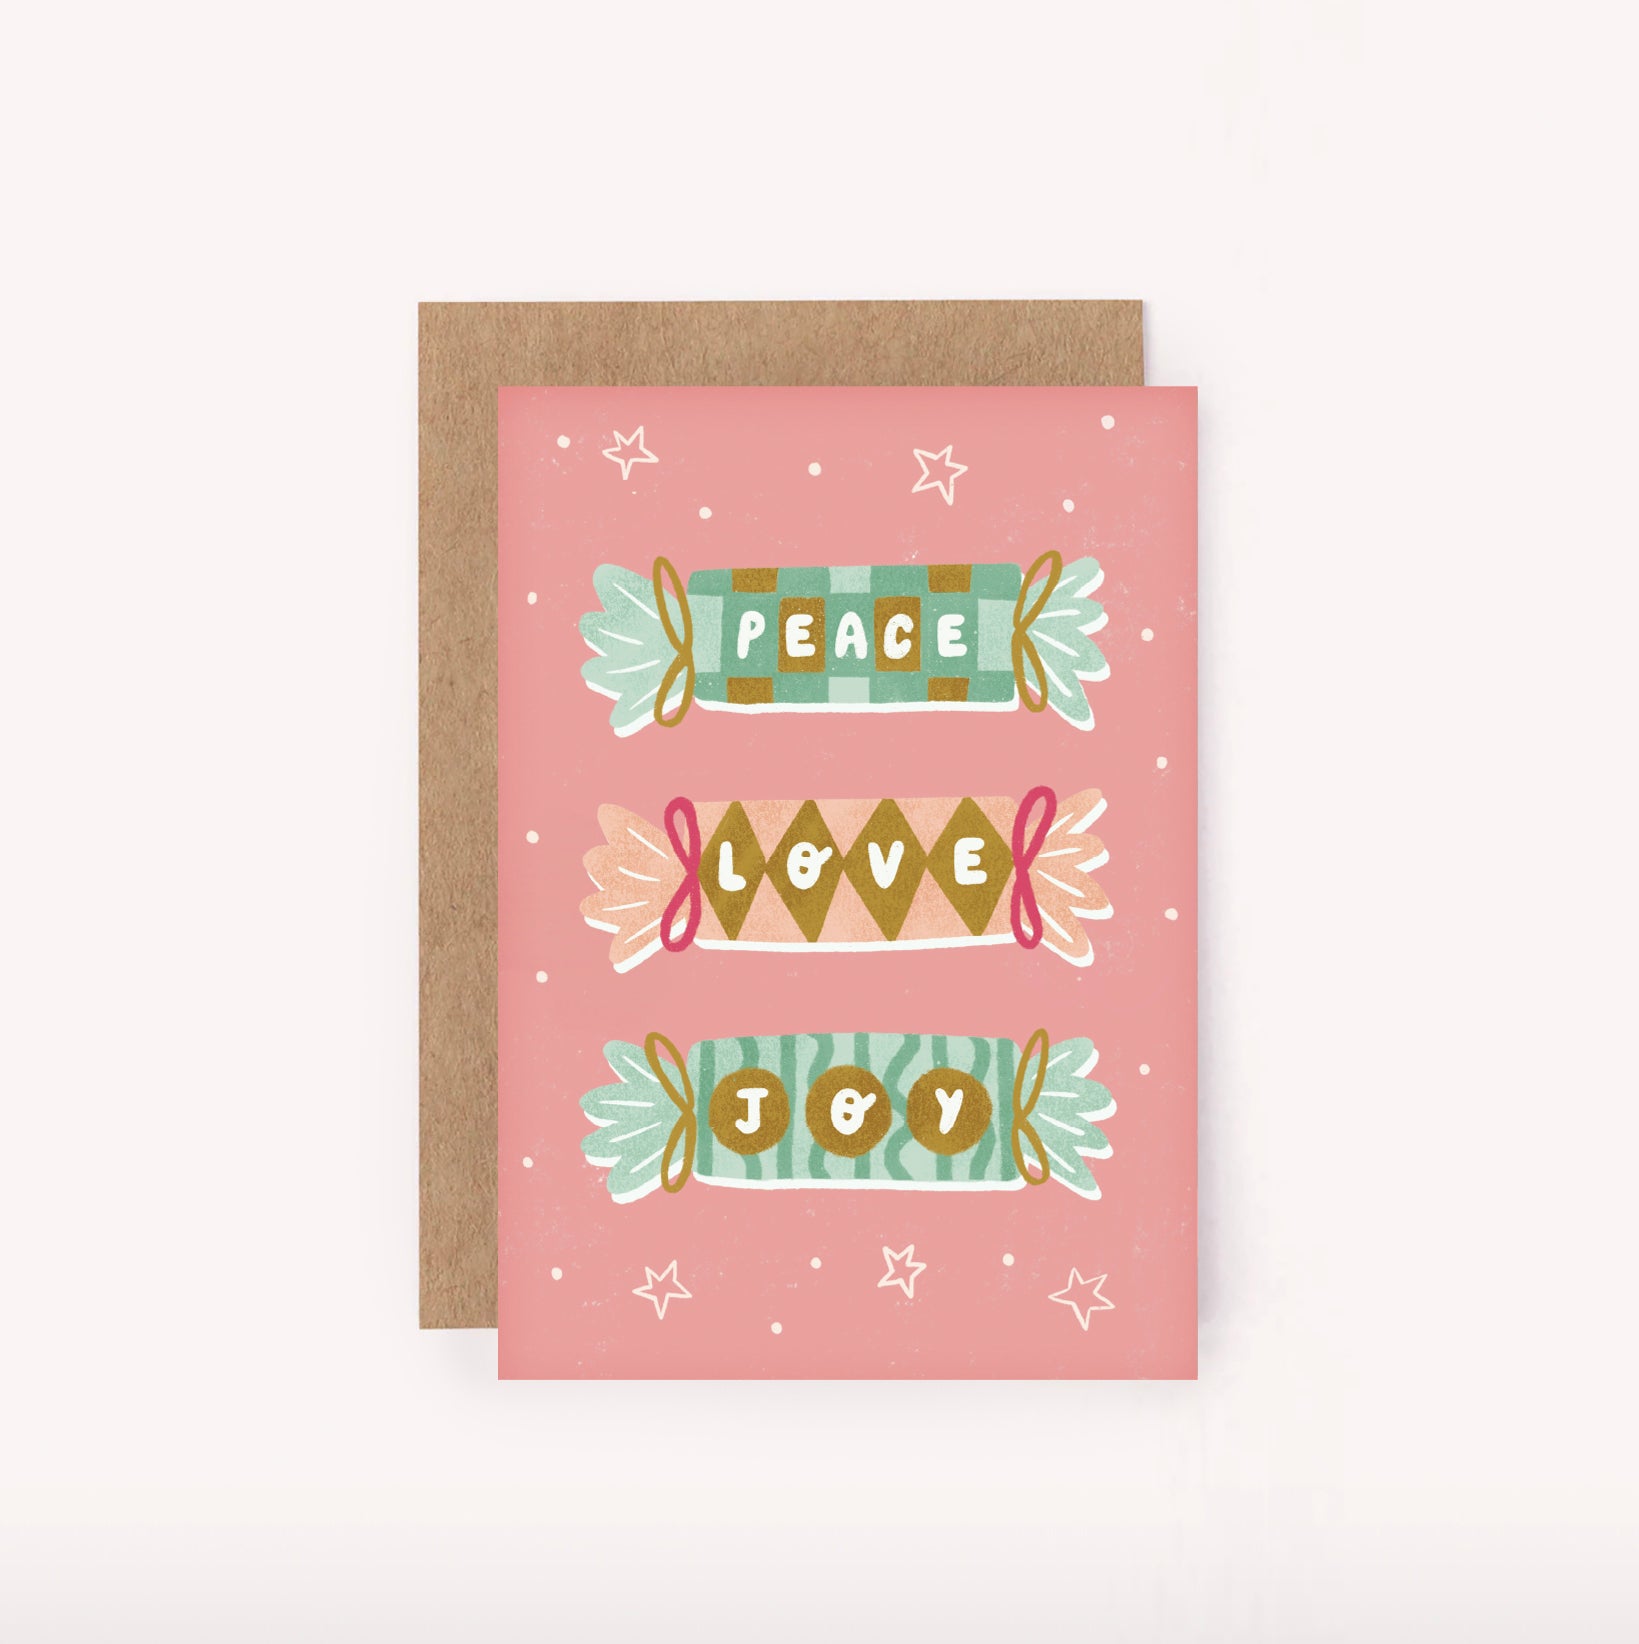 Send some Peace, Love & Joy with this illustrated mini Christmas card. Features three pink, gold and green boldly patterned Xmas crackers, tied with ribbons and hand-lettered "Peace" "Love" "Joy" set upon a pink background